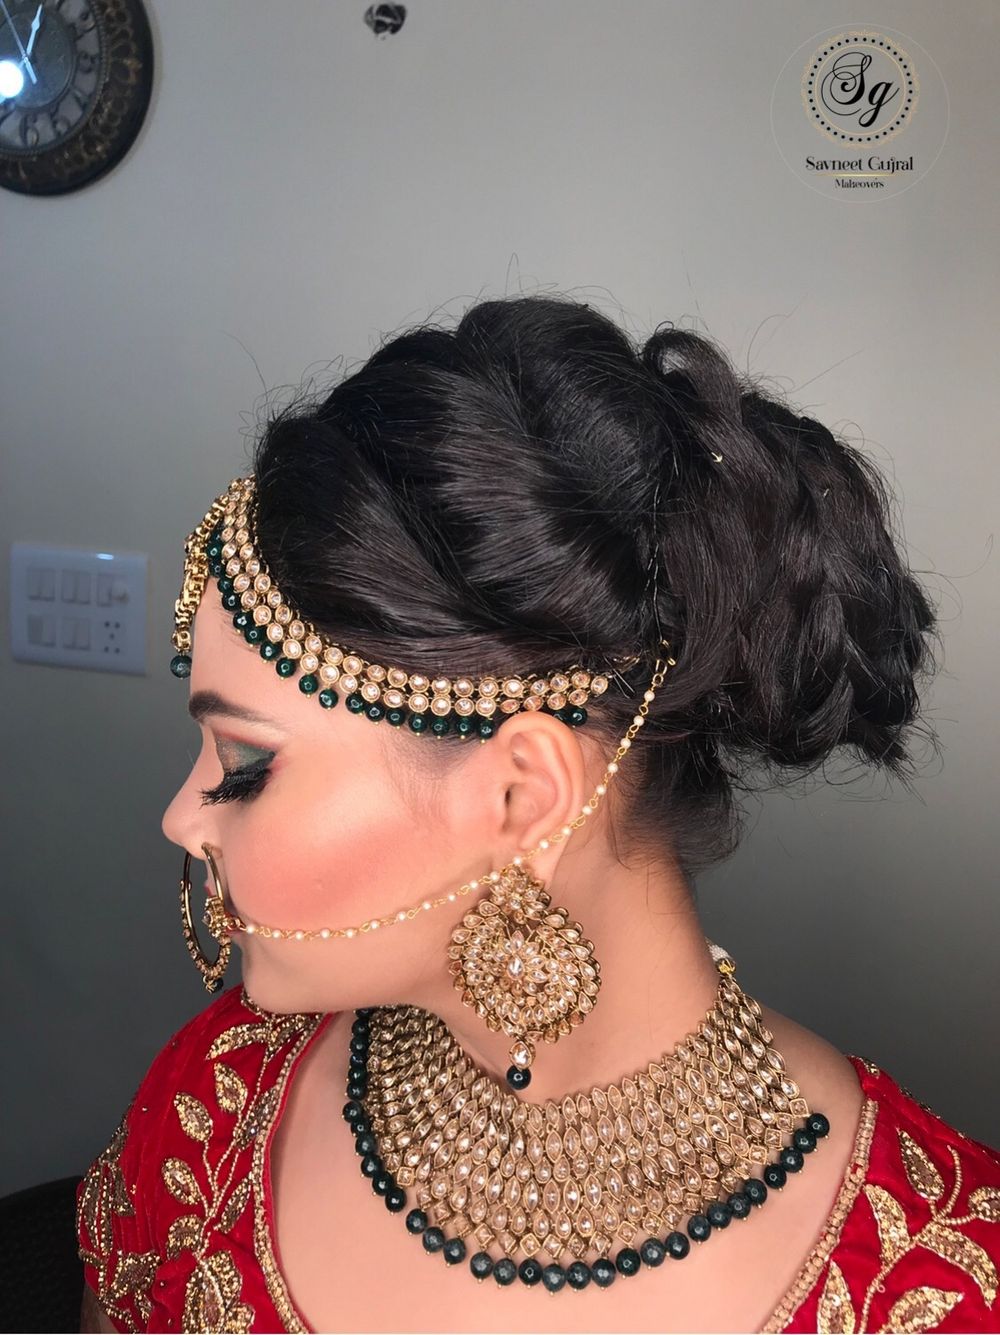 Photo From Bride Dilpreet - By Savneet Gujral Makeovers